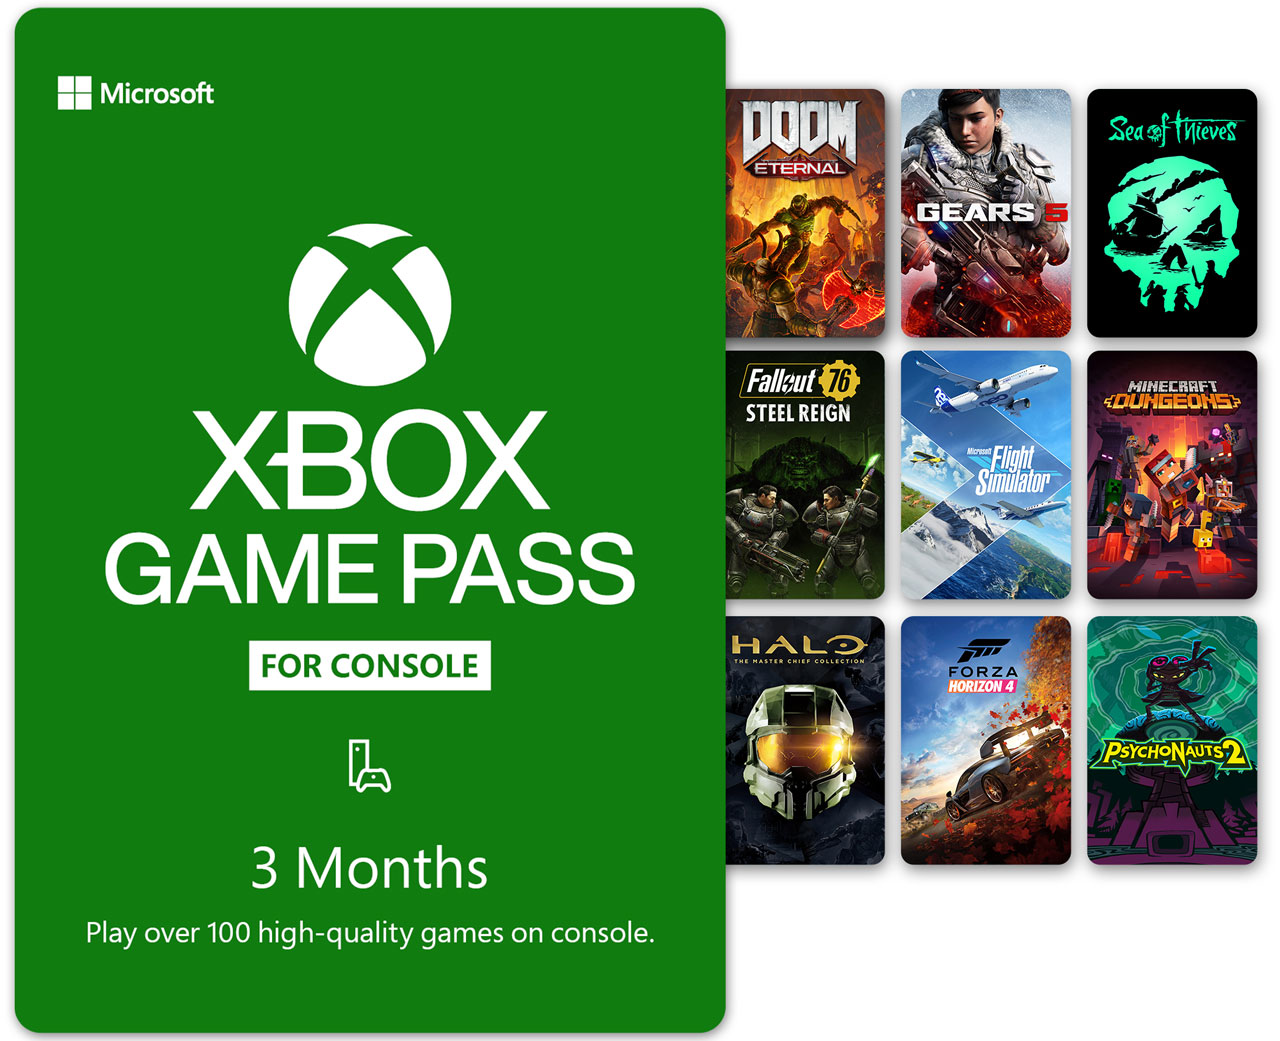 Microsoft Xbox Game Pass for Console 3 Month Digital Code [Digital]  JPU-00085 - Best Buy